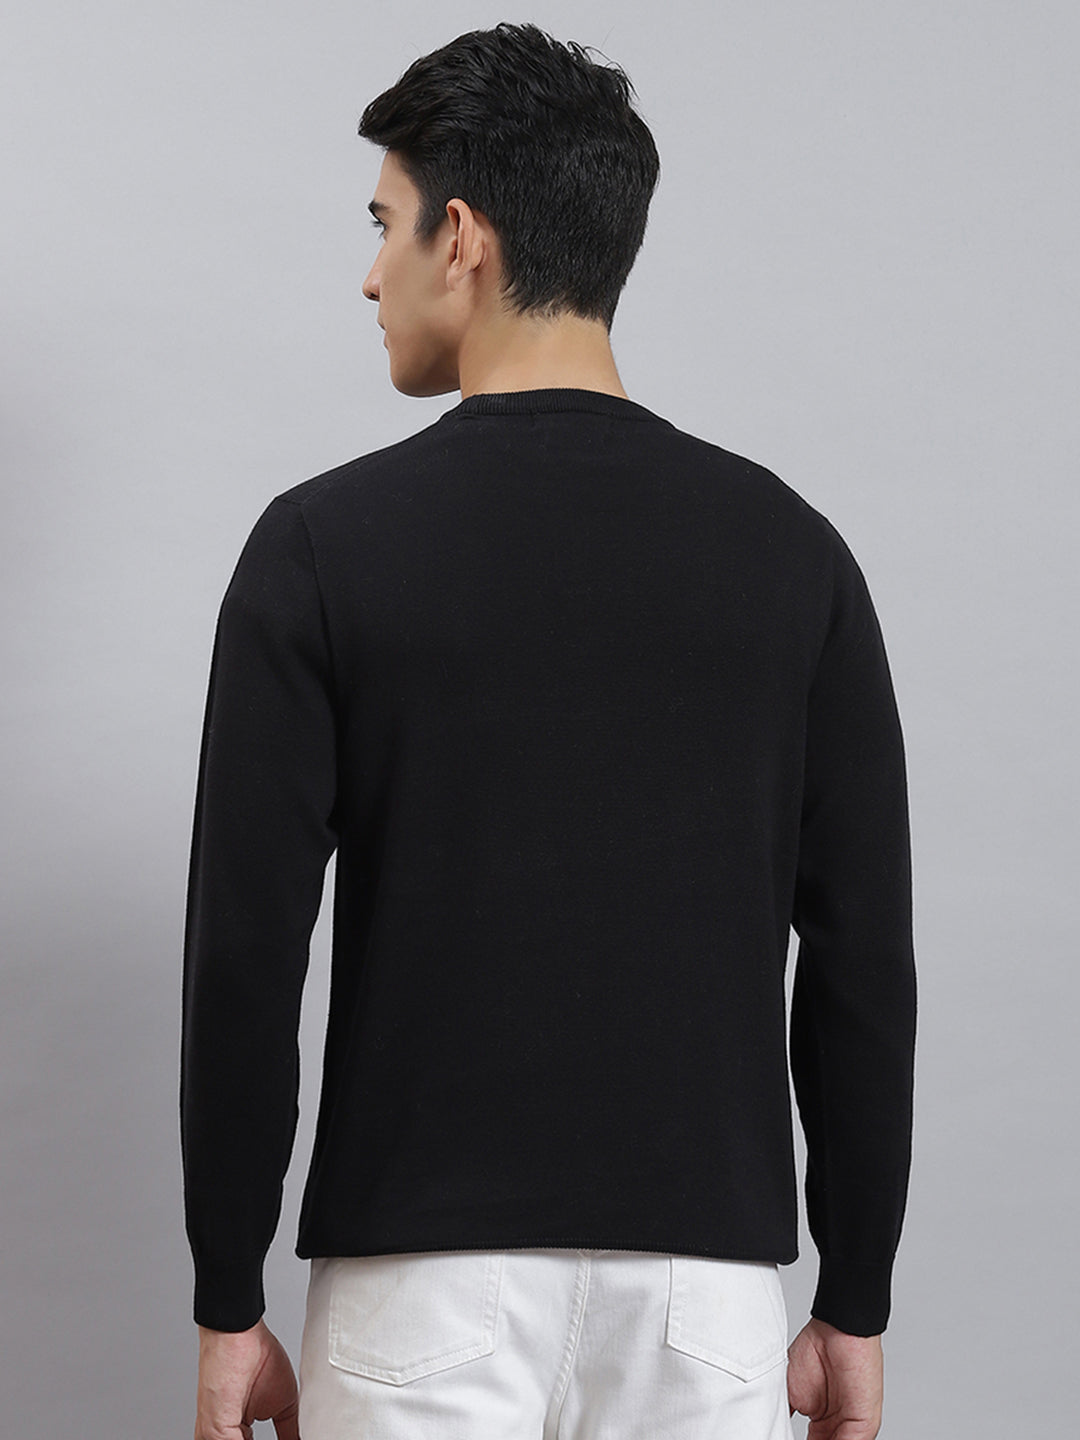 Men Black Solid Round Neck Full Sleeve Sweaters/Pullovers